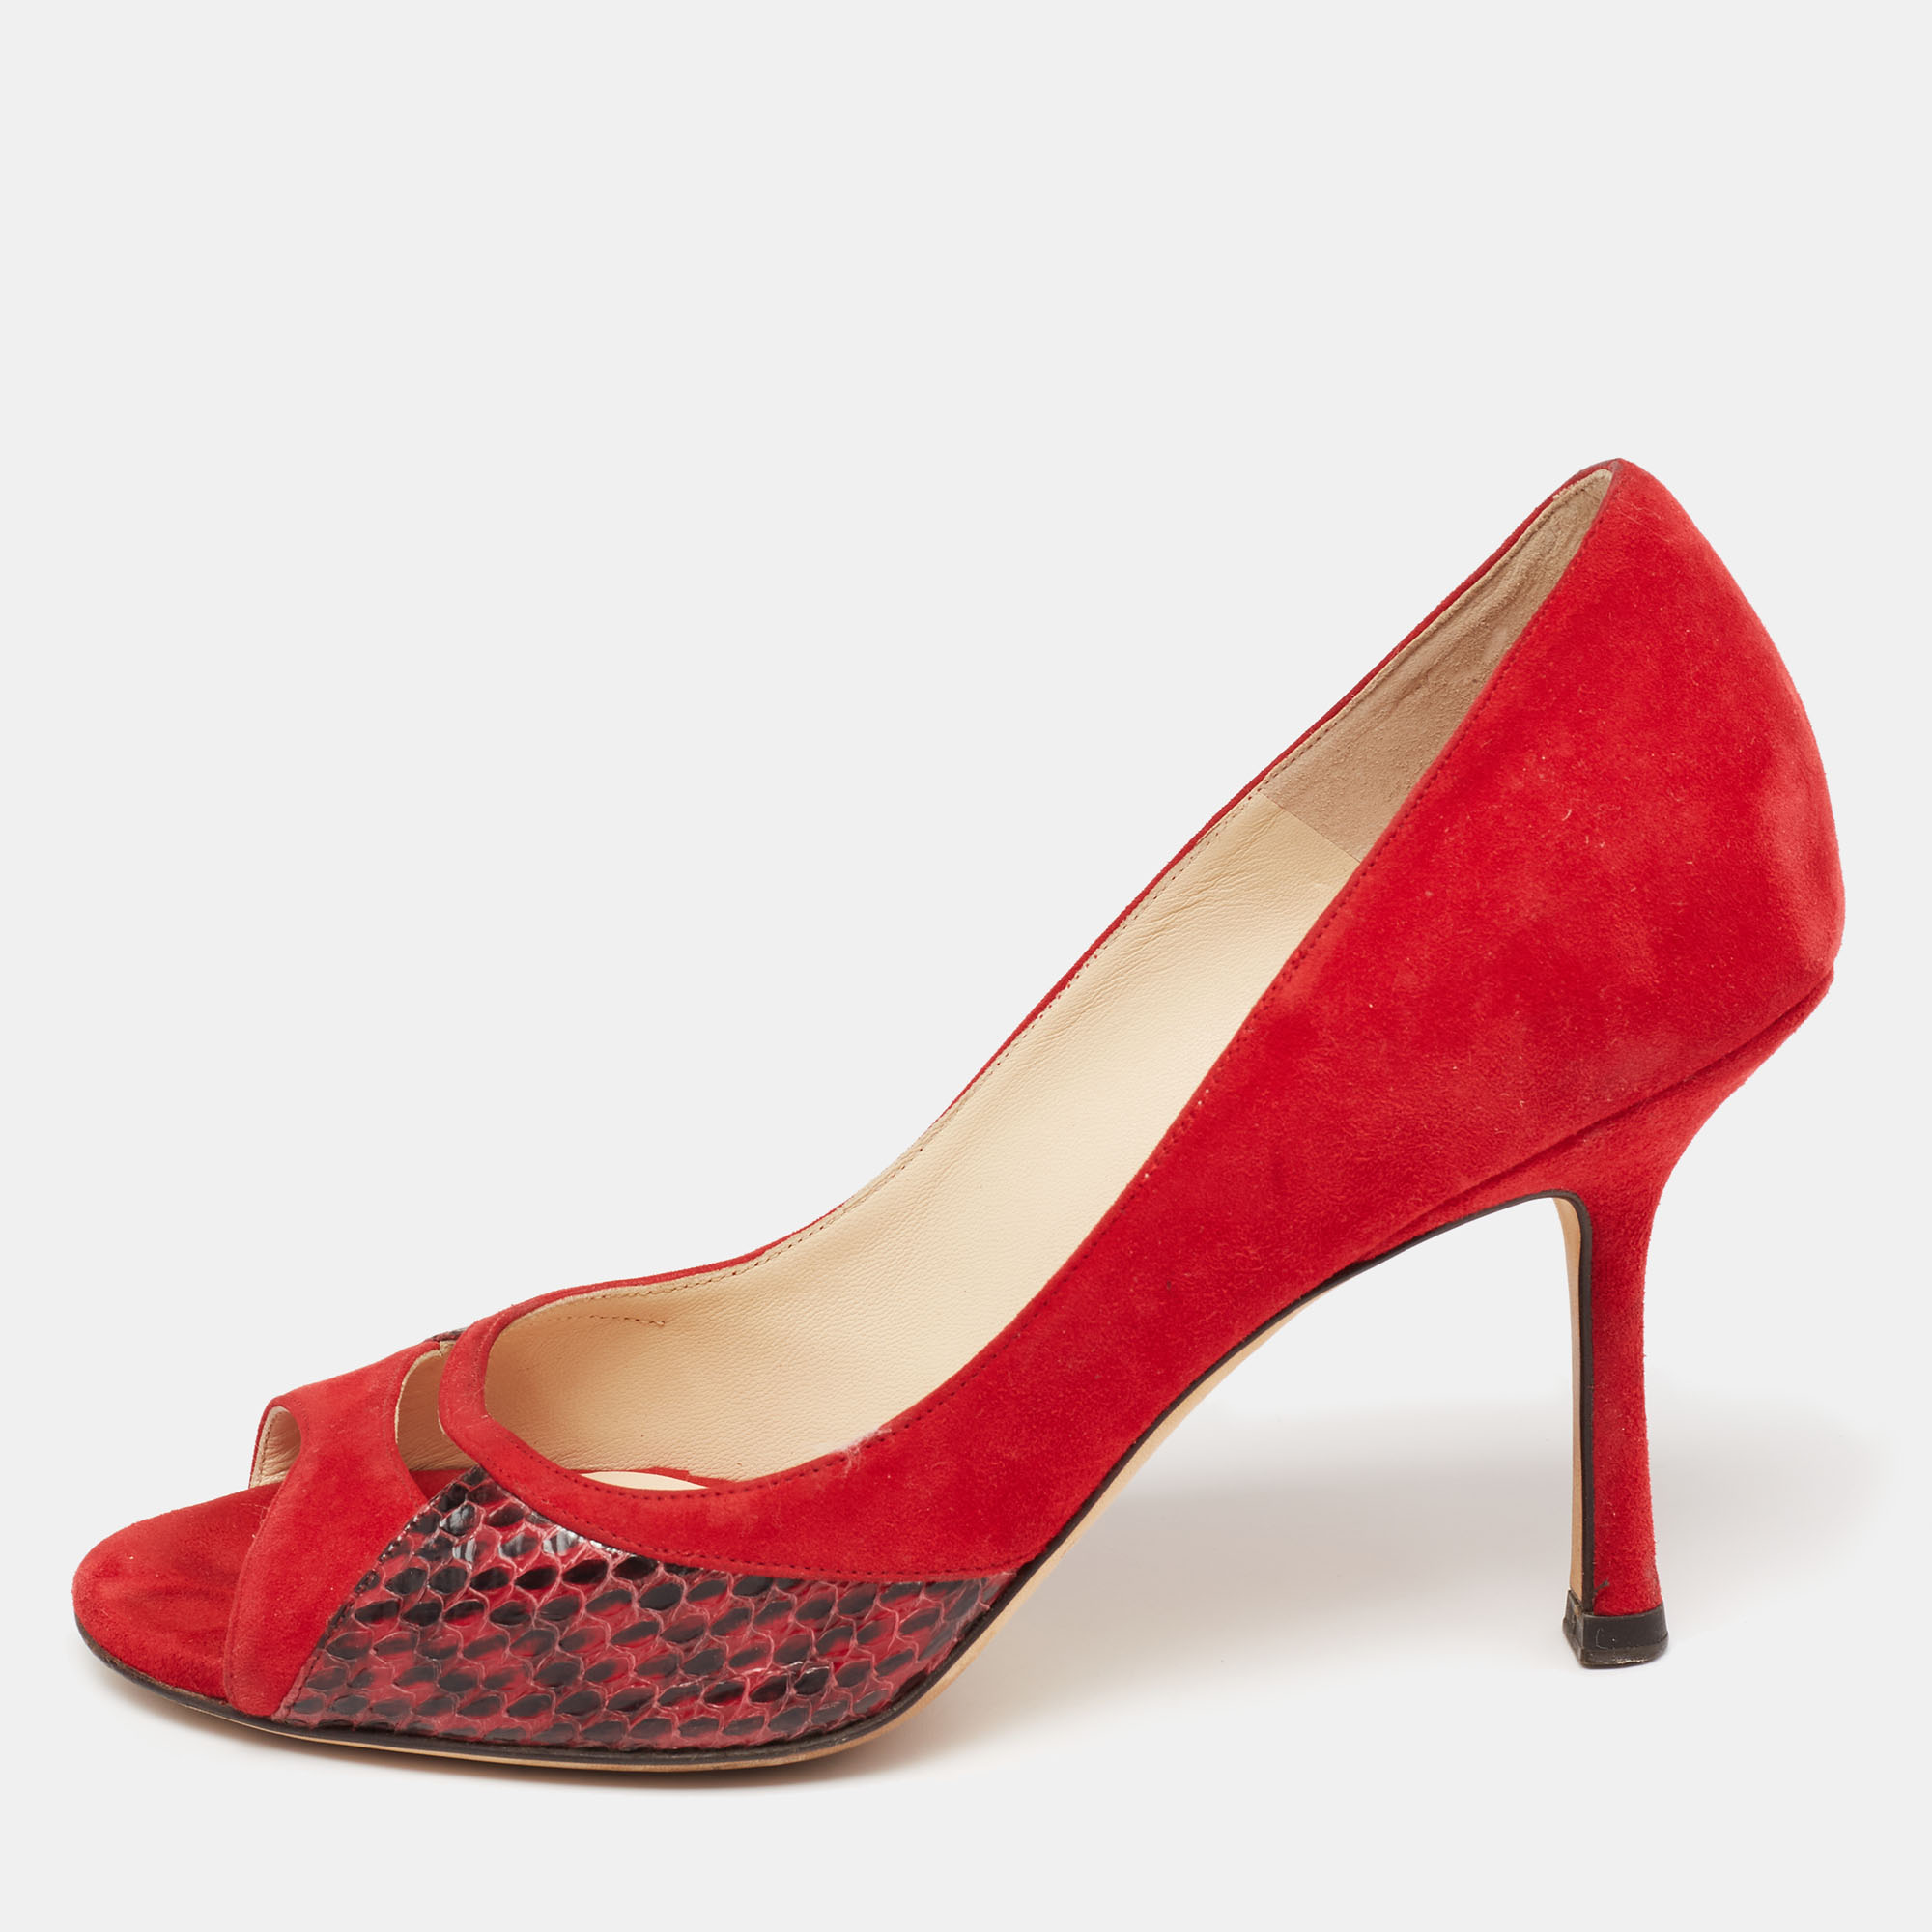 

Jimmy Choo Red Suede And Snakeskin Peep Toe Pumps Size